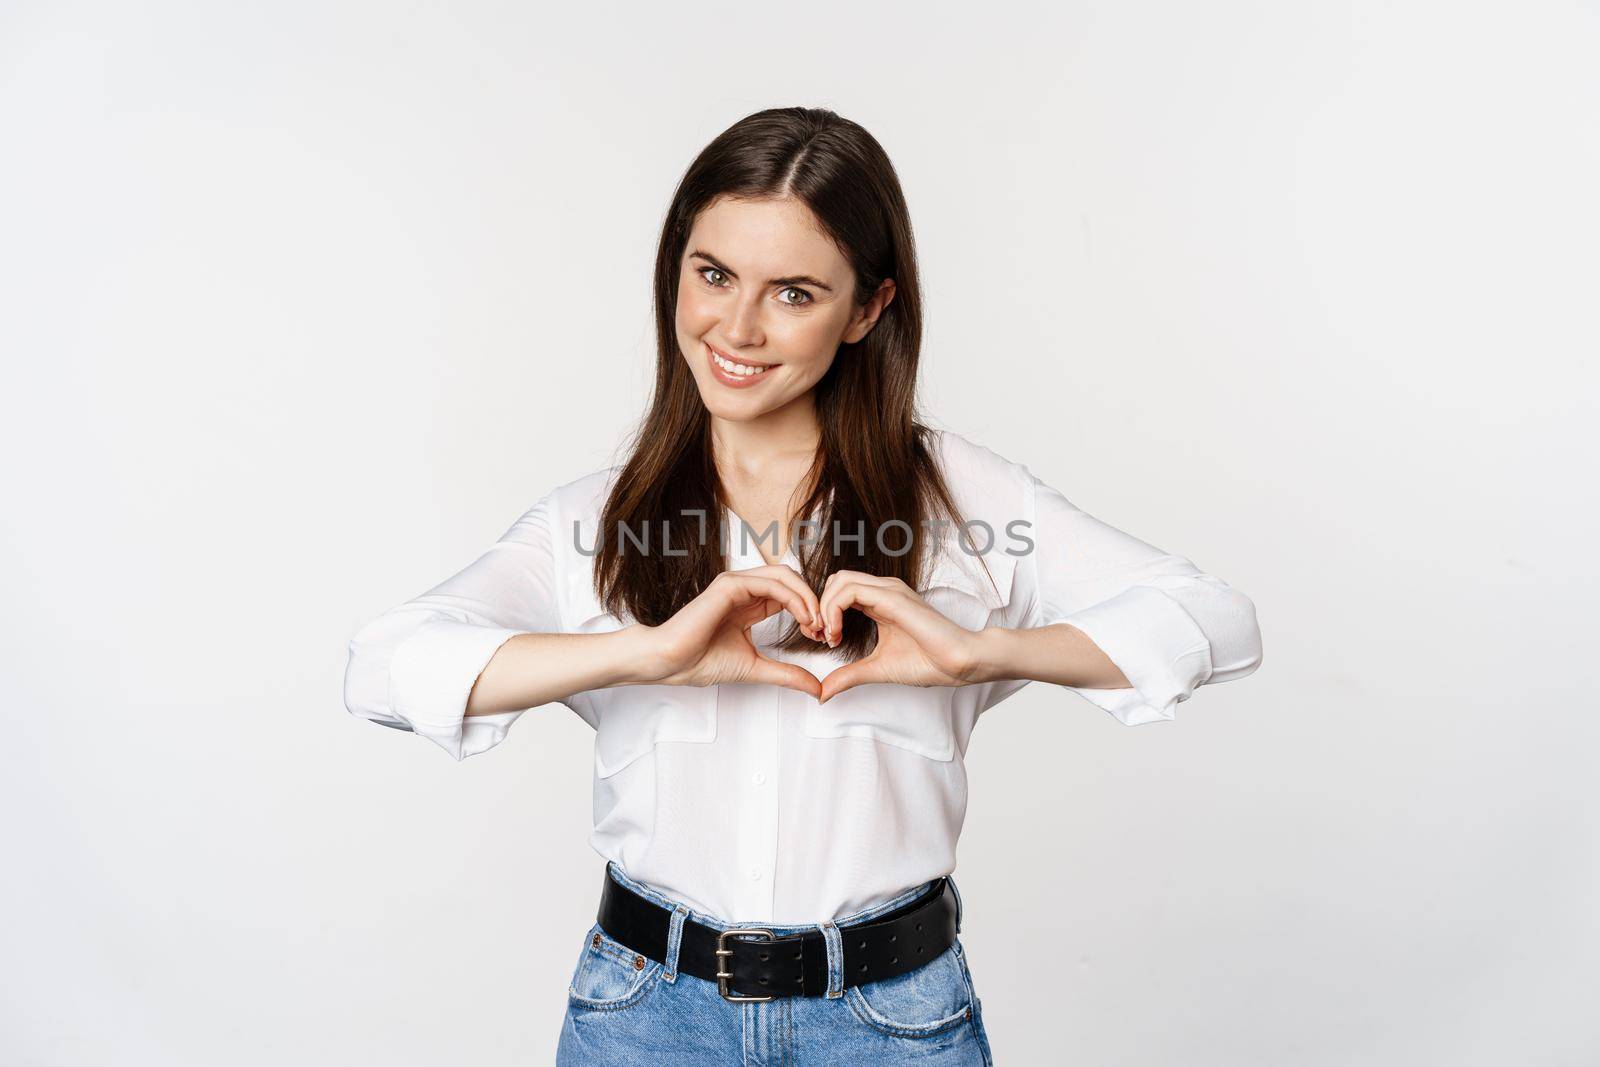 Lovely feminine woman showing heart sign, romantic gesture and smiling with care and tenderness, standing over white background.